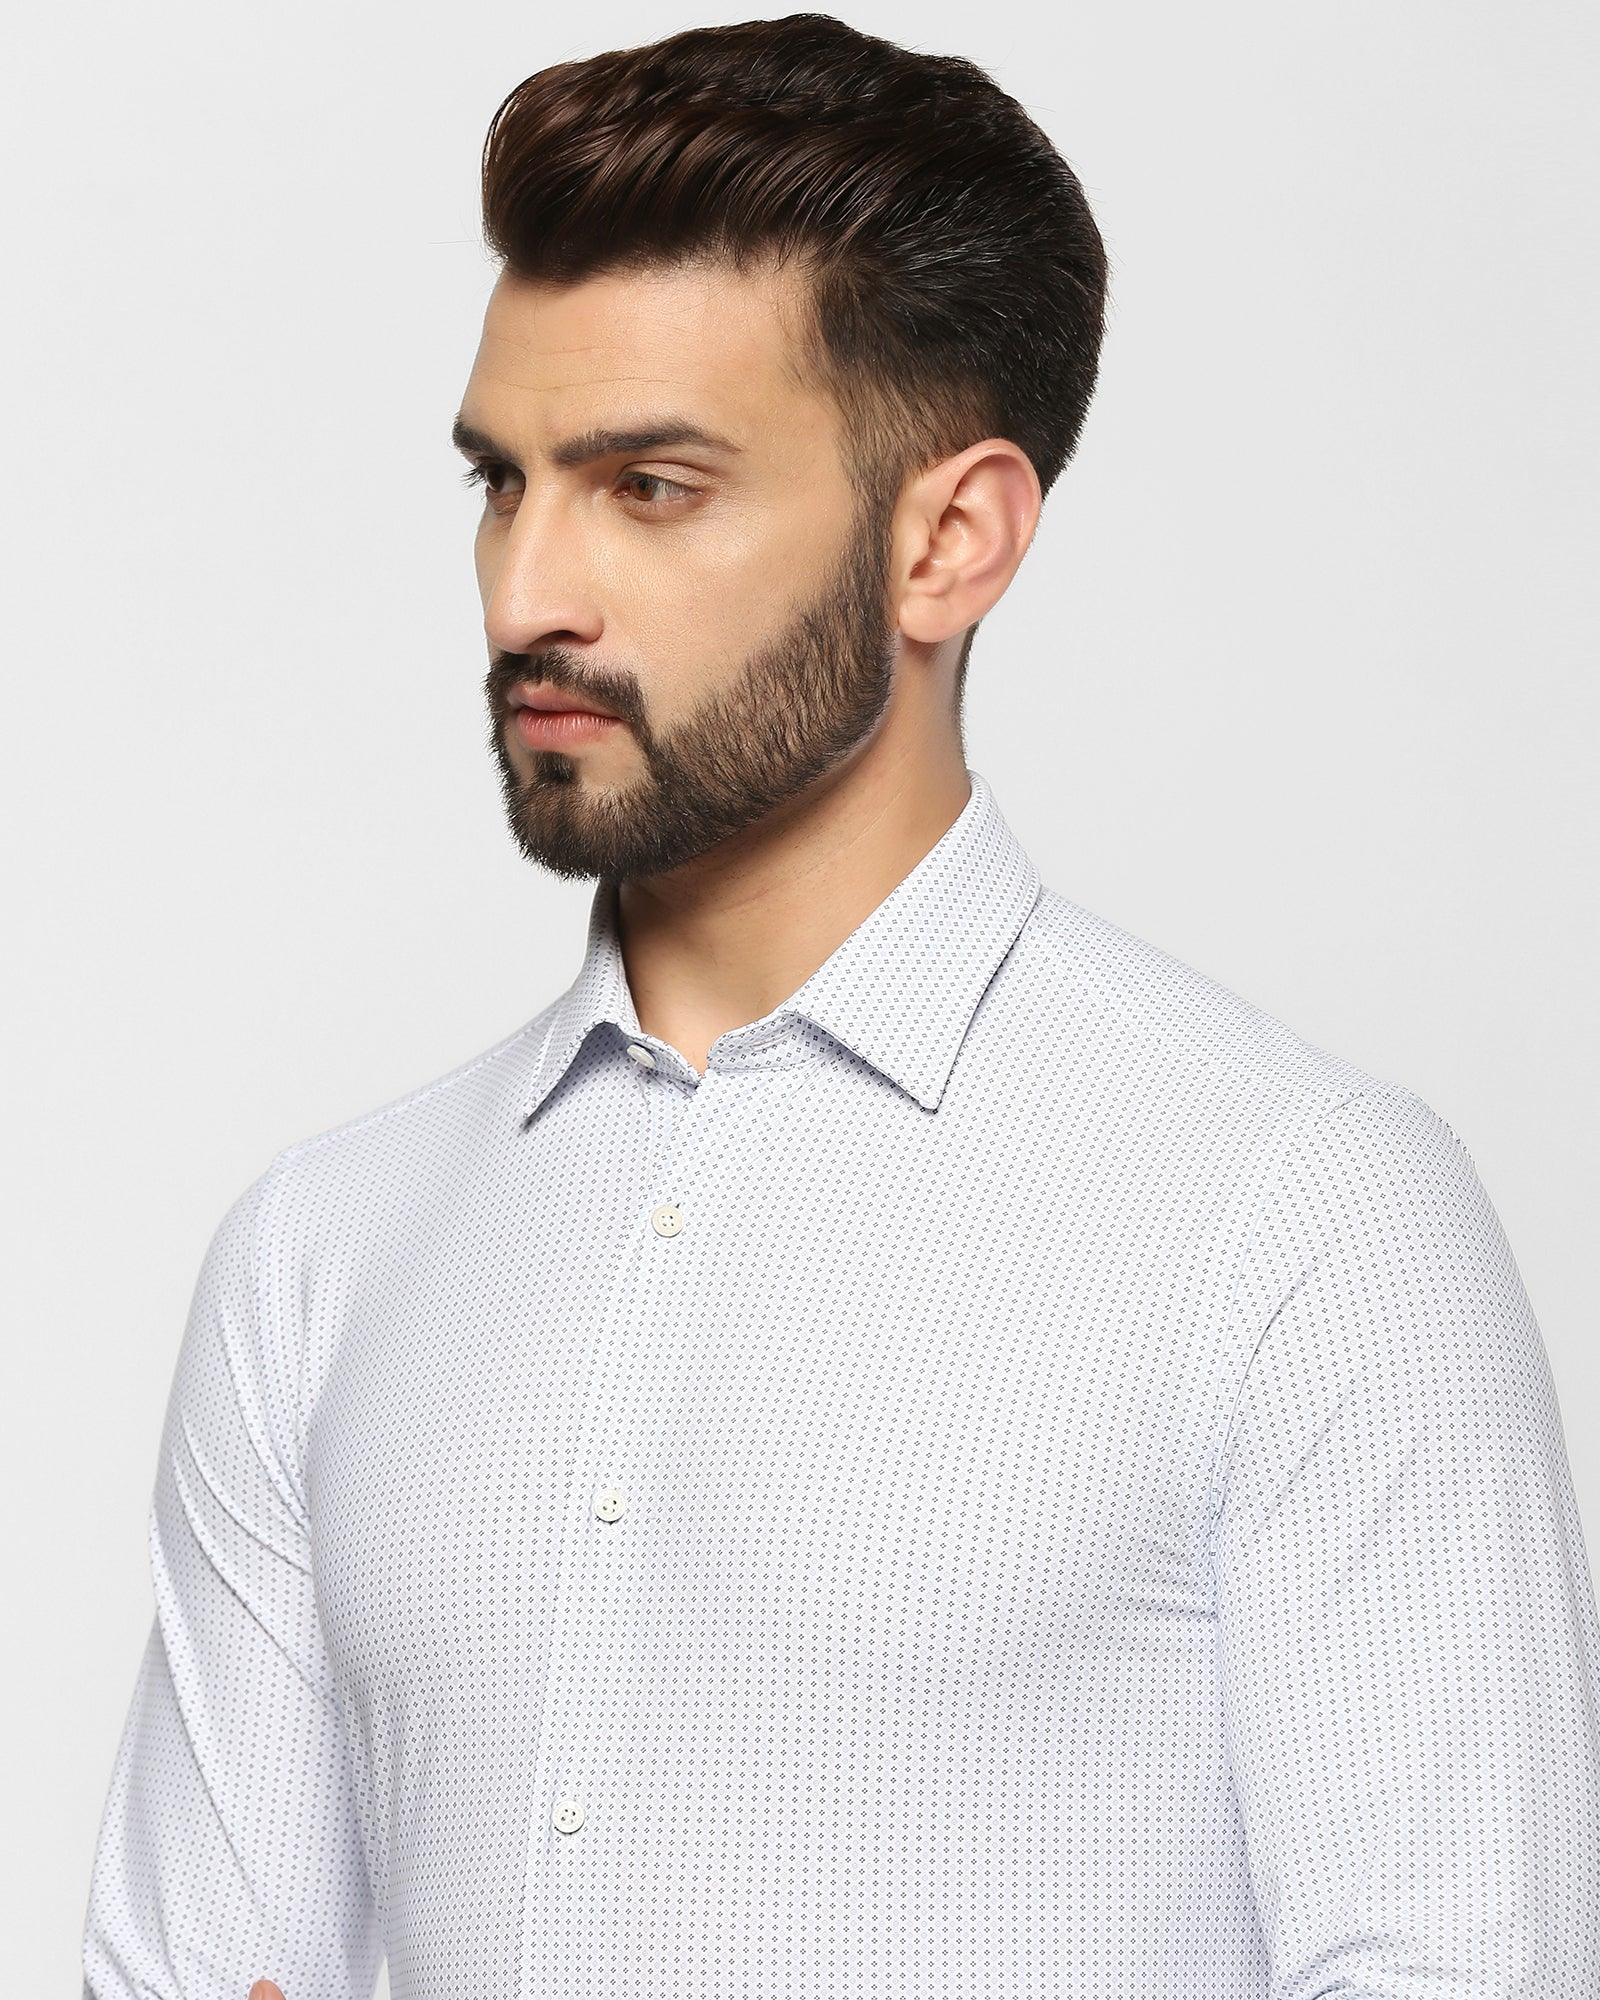 Formal White Printed Shirt - Client